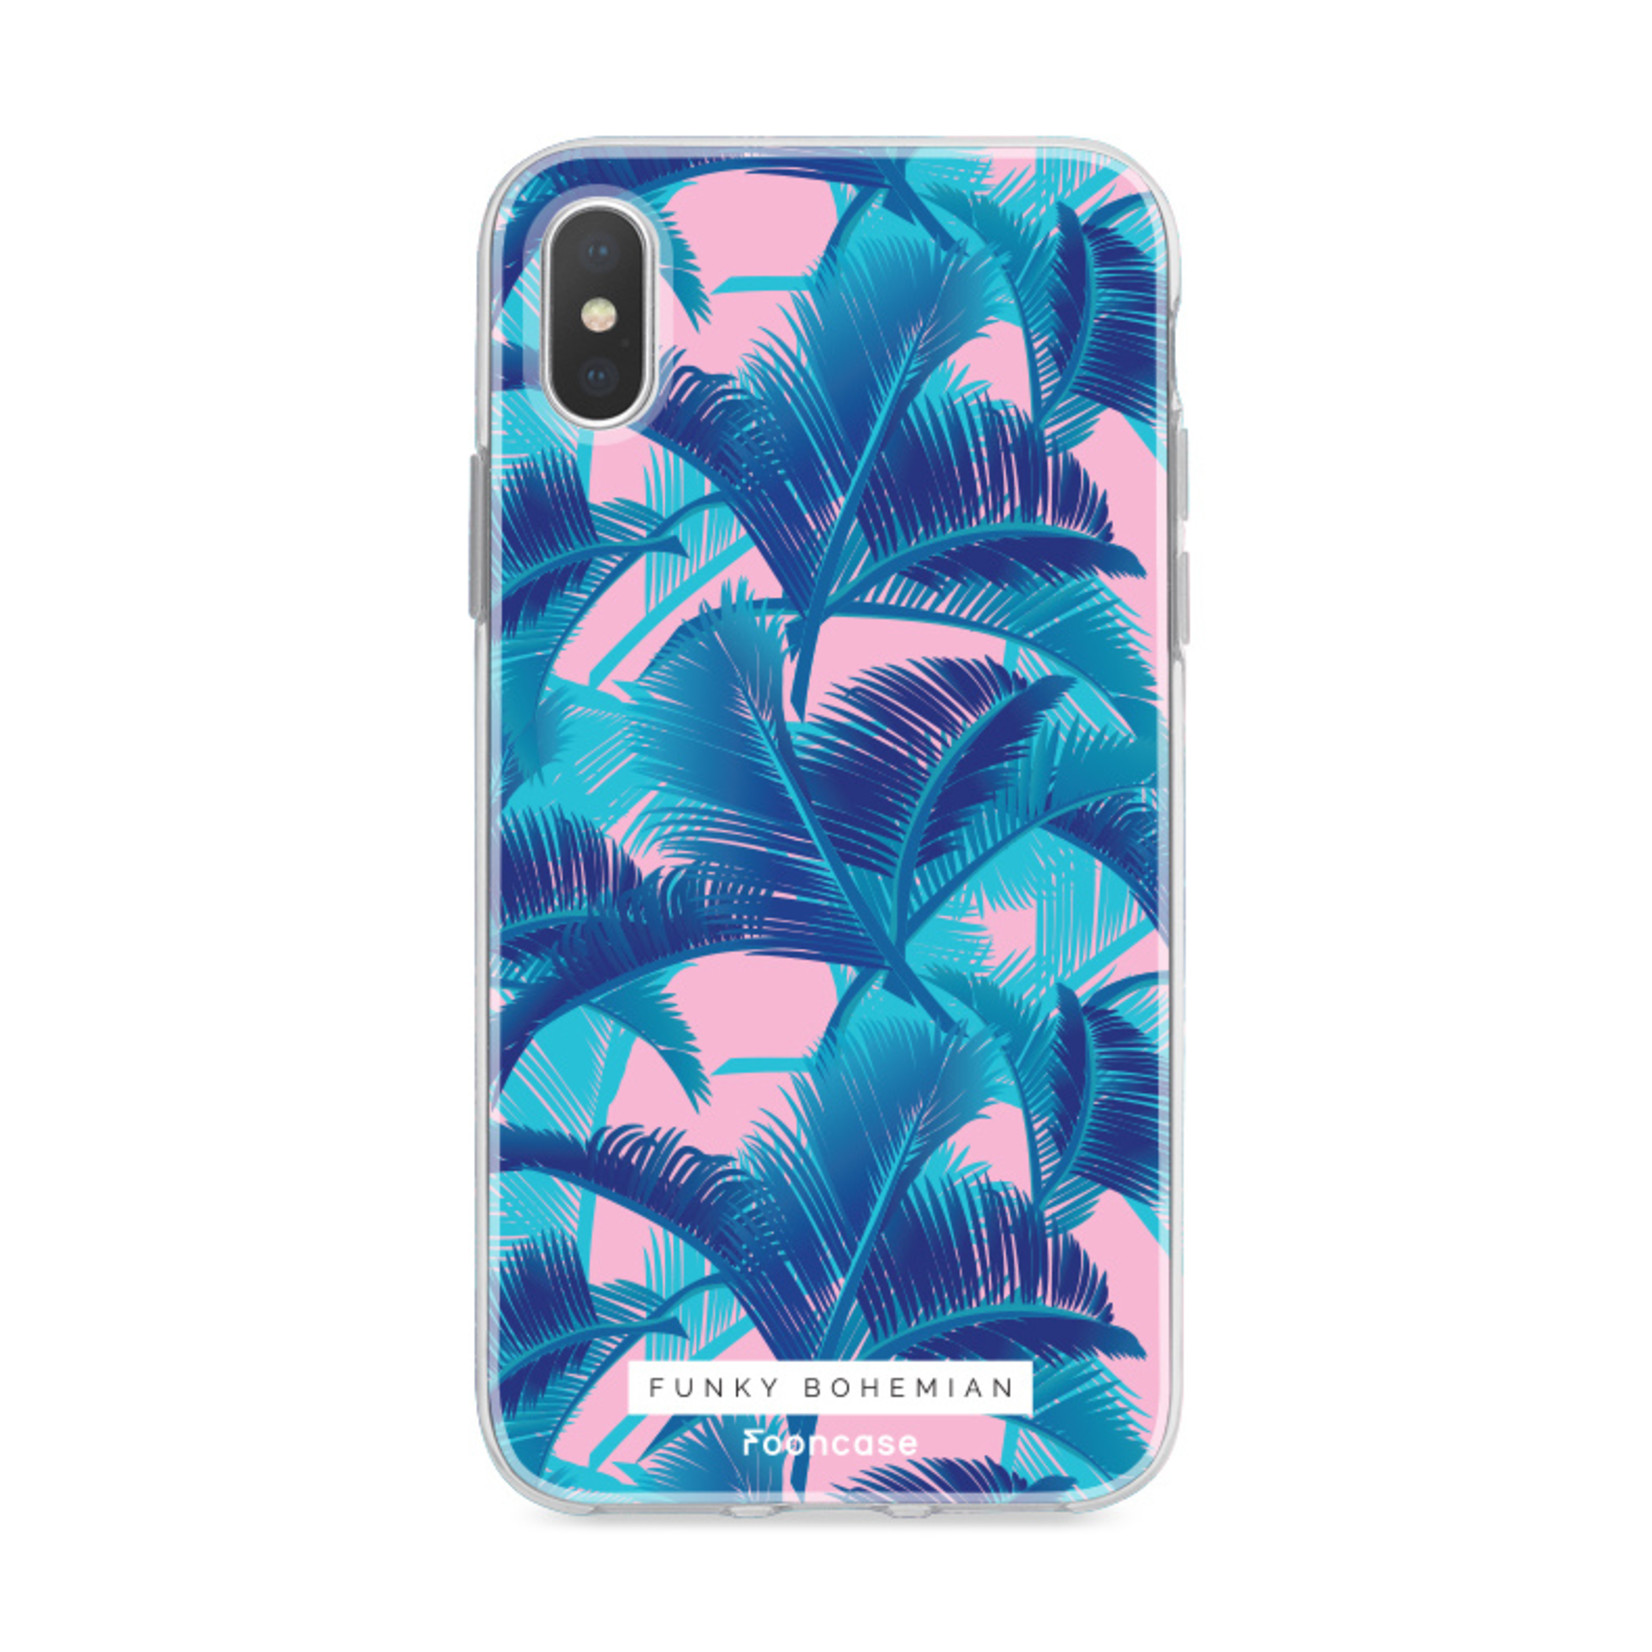 FOONCASE Iphone XS Cover - Funky Bohemian